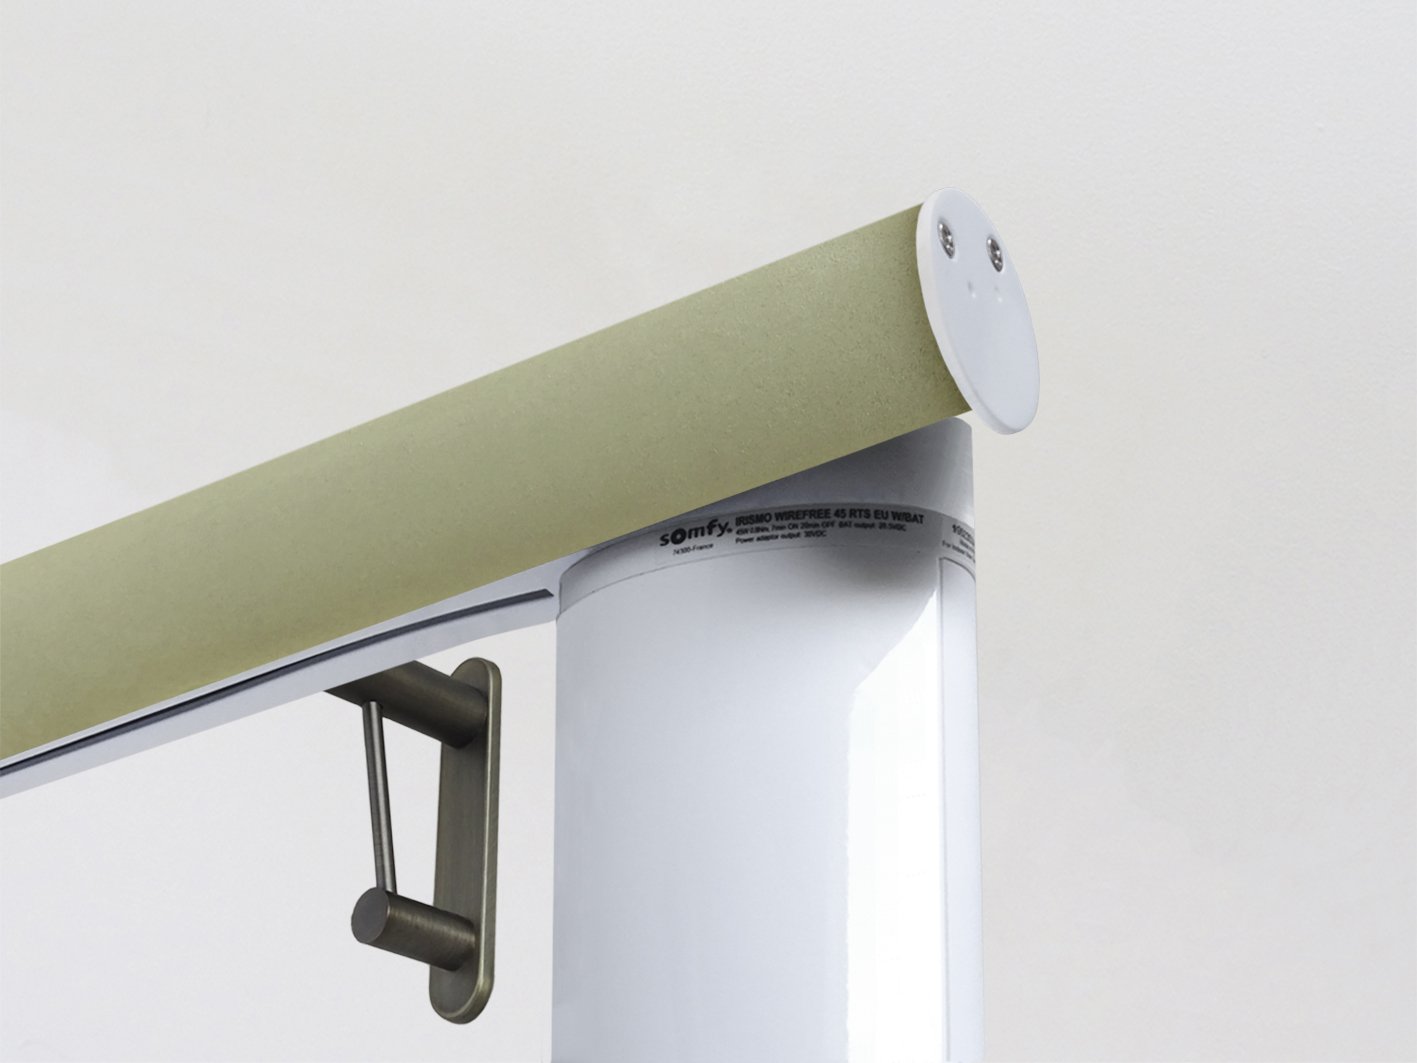 Motorised electric curtain pole in new acorn green, wireless & battery powered using the Somfy Glydea track | Walcot House UK curtain pole specialists